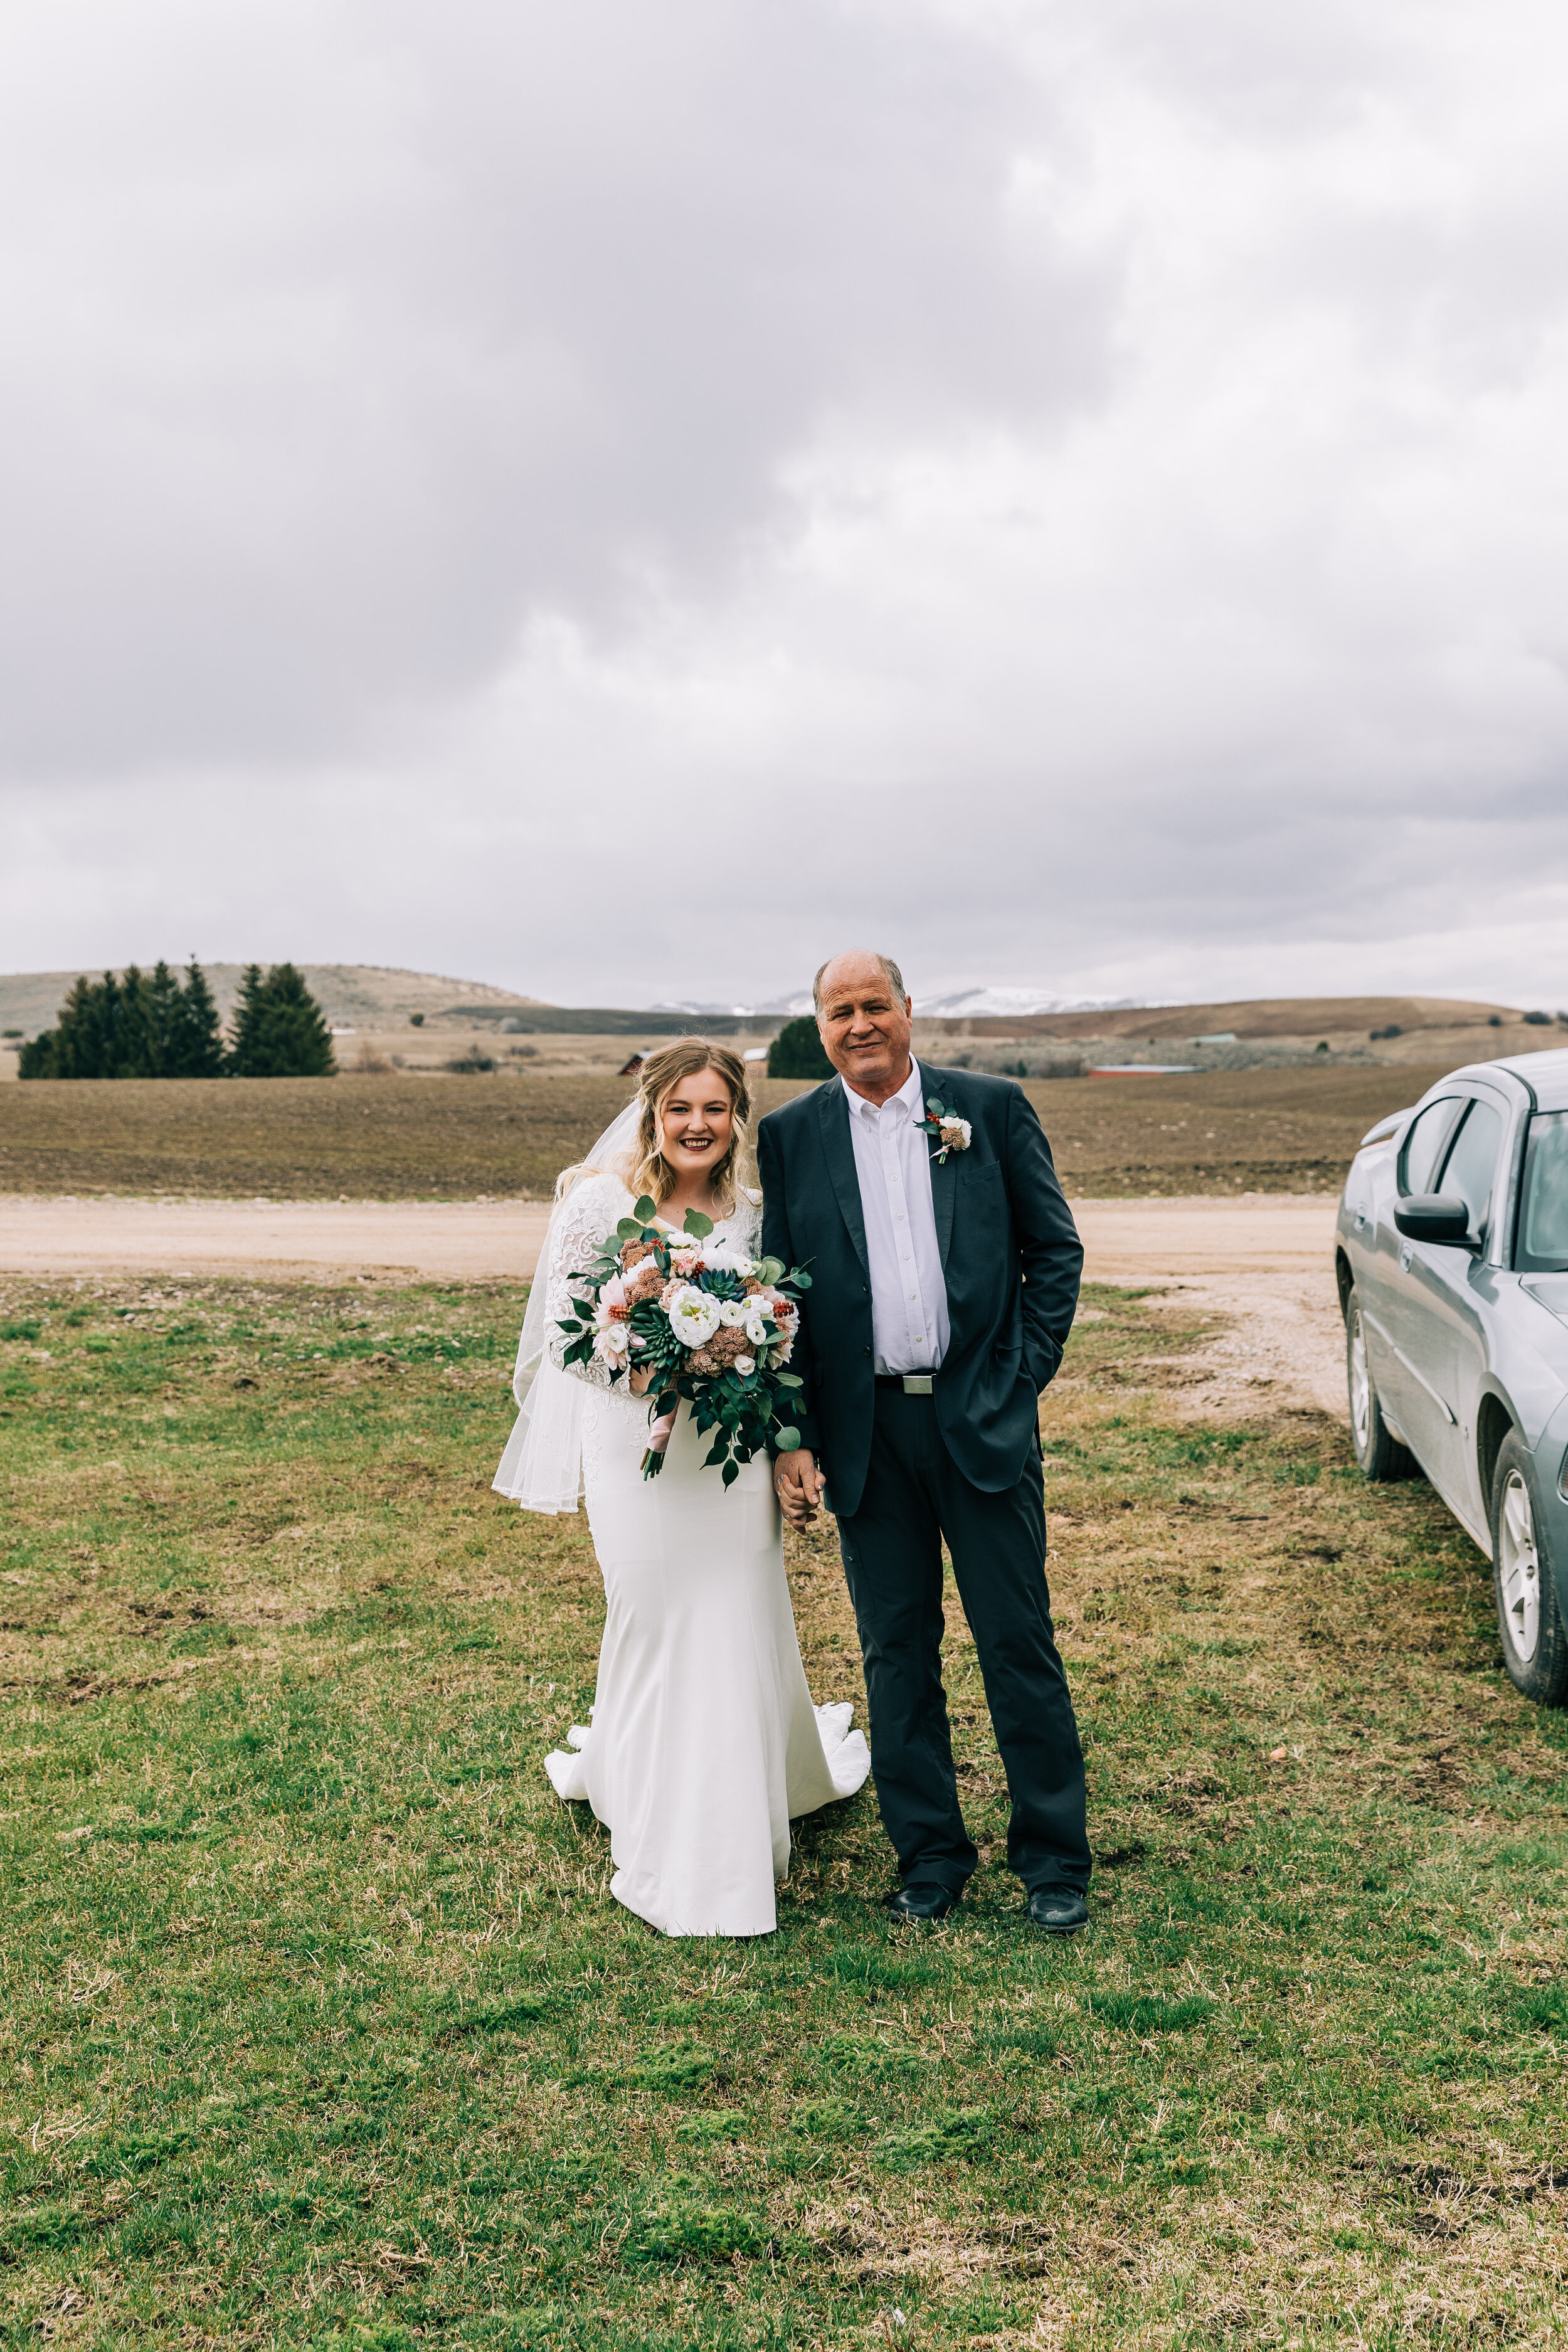  A beautiful bride walking with her father in a stormy elopement styled wedding photo shoot in Preston, Idaho. Elopement wedding inspiration bridal aesthetic stormy weather wedding photo shoot bridal attire inspiration wedding goals bridal goals fath